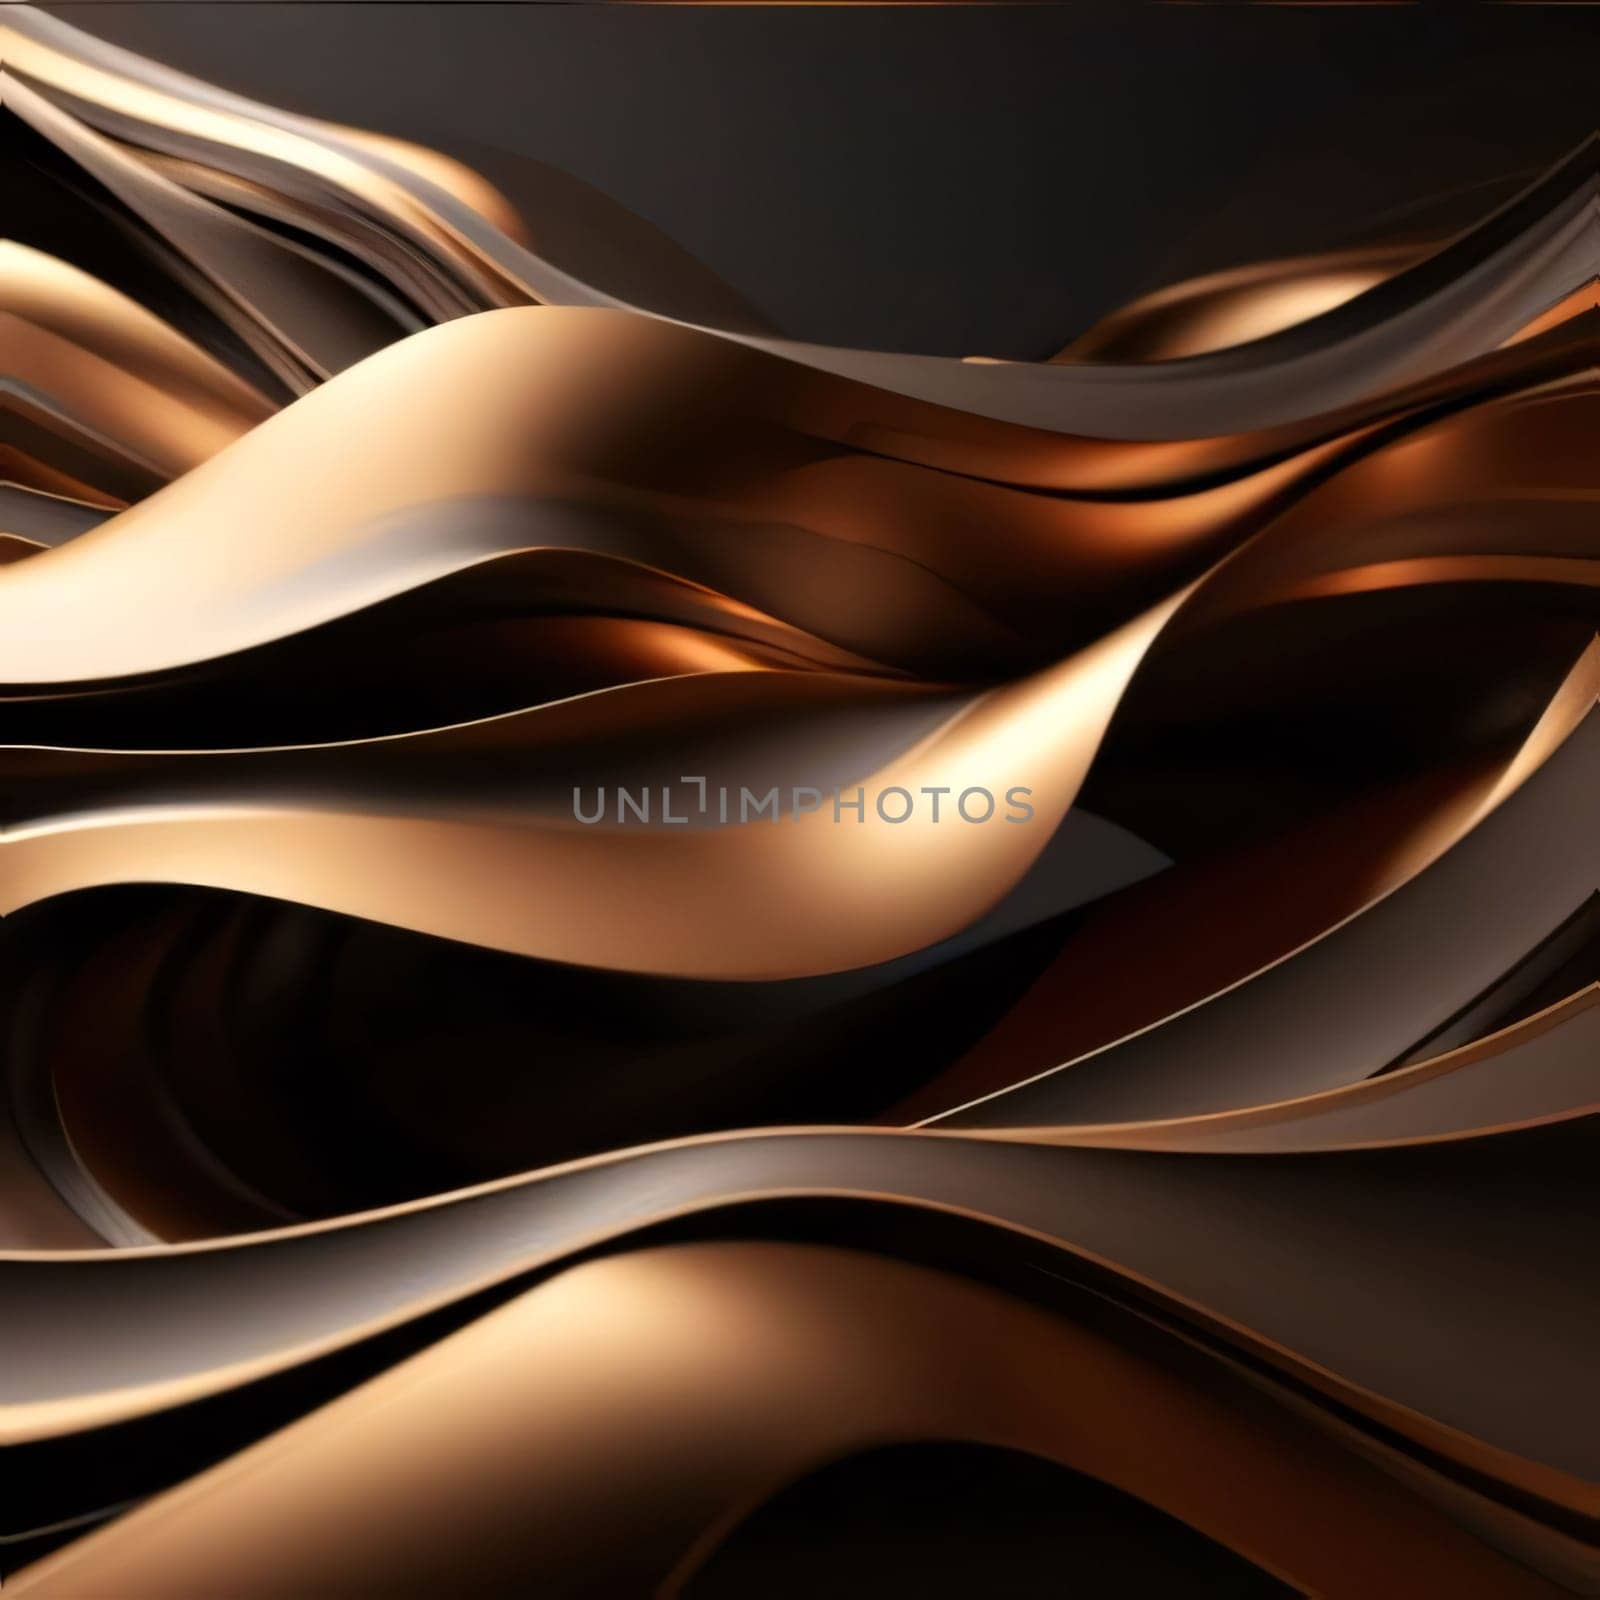 Abstract background design: 3d render of abstract wavy metallic background. Creative design concept.